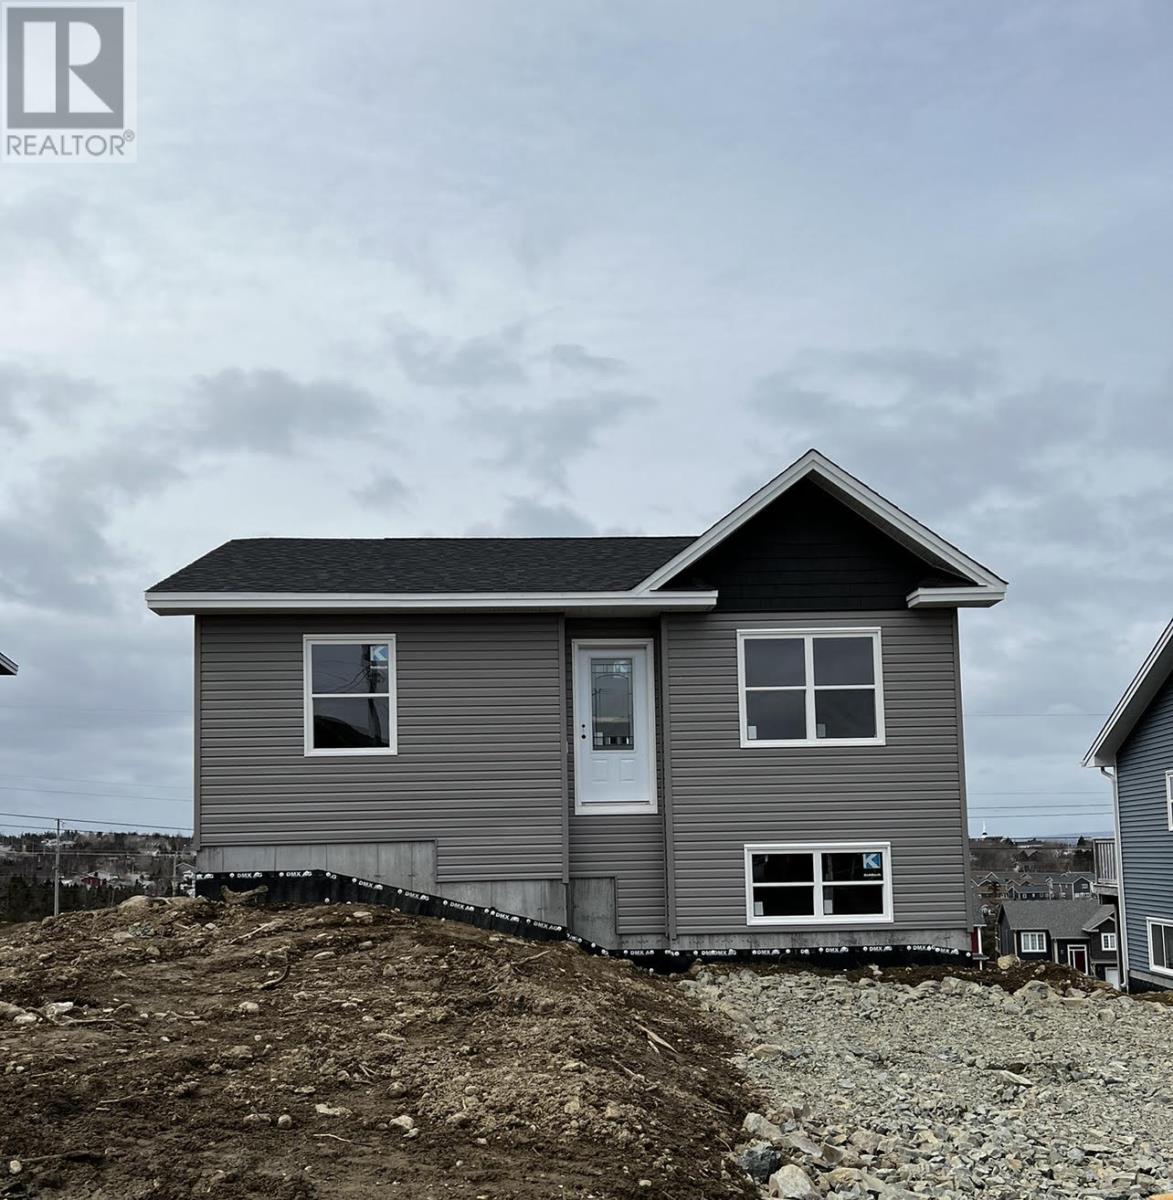 2 Bedroom Residential Home For Sale | 34 Samuel Drive | Conception Bay South | A1X0H9